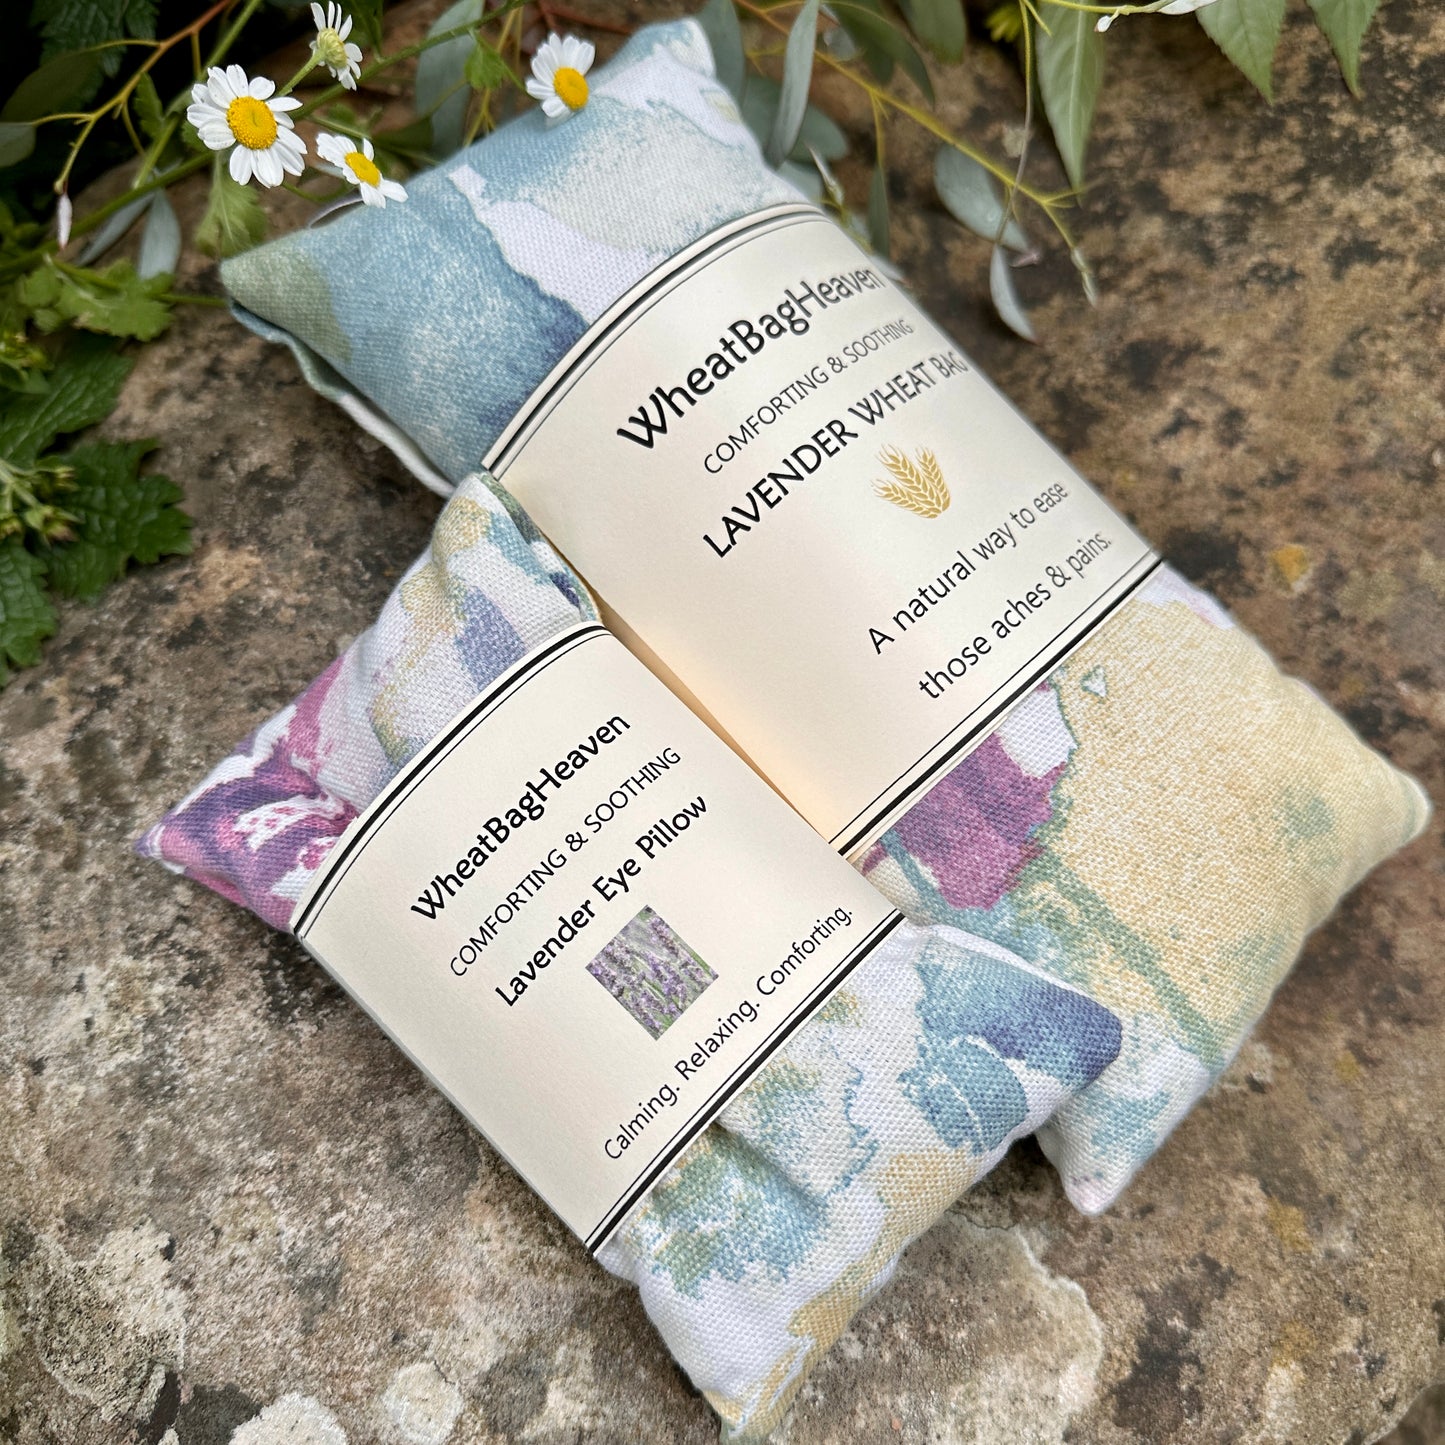 Lavender Wheat Bag. Aromatherapy heat pack in mystic wood print cotton fabric. Lavender eye pillow. 